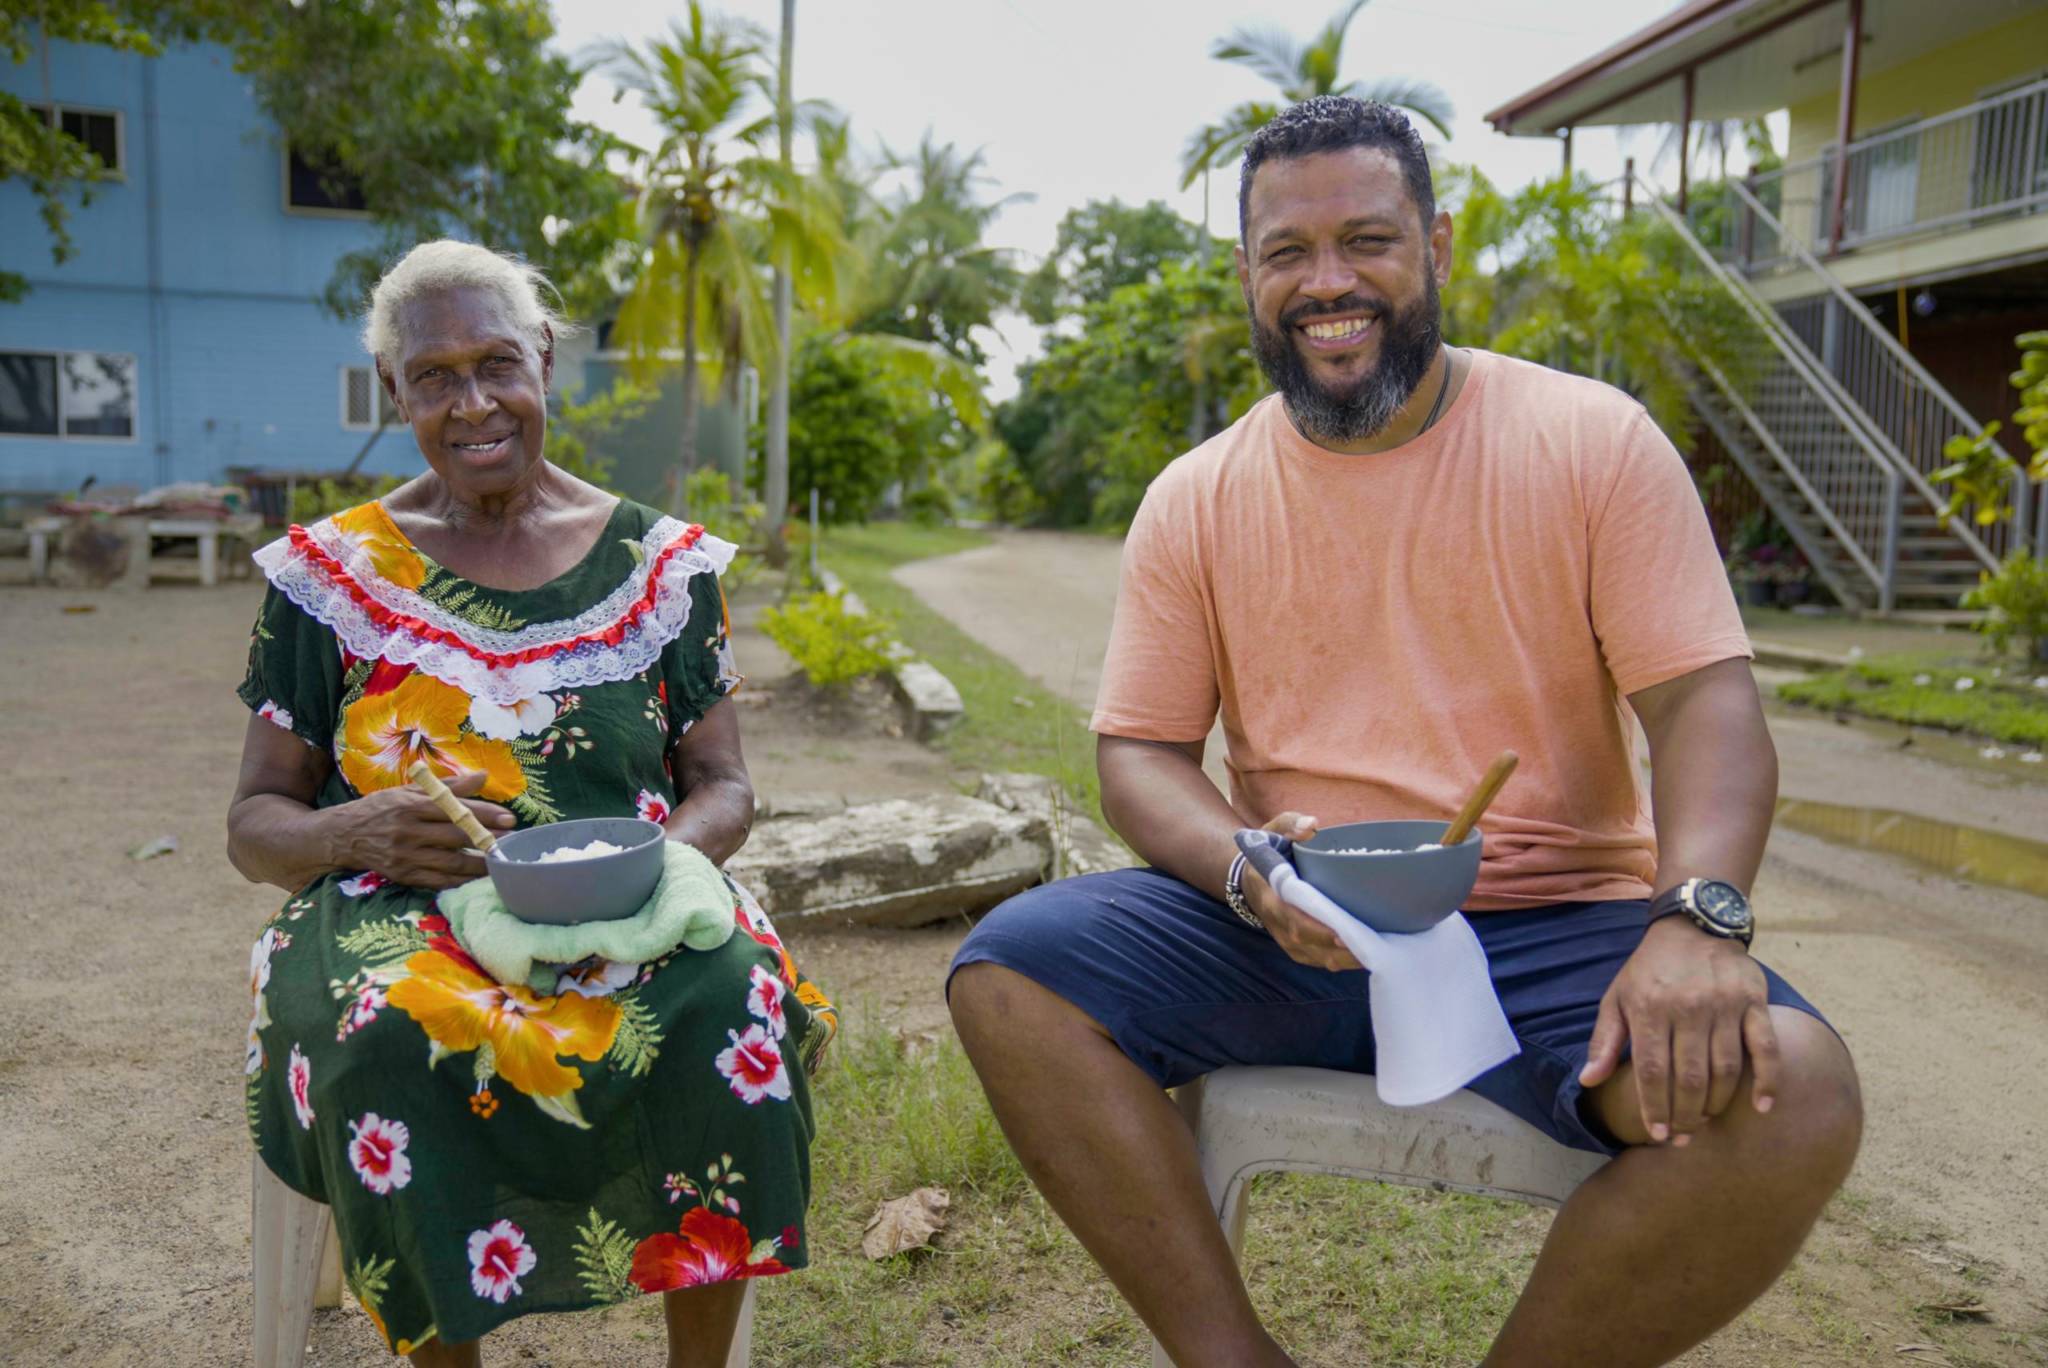 Aaron Fa'Aoso sits outside next to a woman with pots in their hands as part of series STRAIT TO THE PLATE